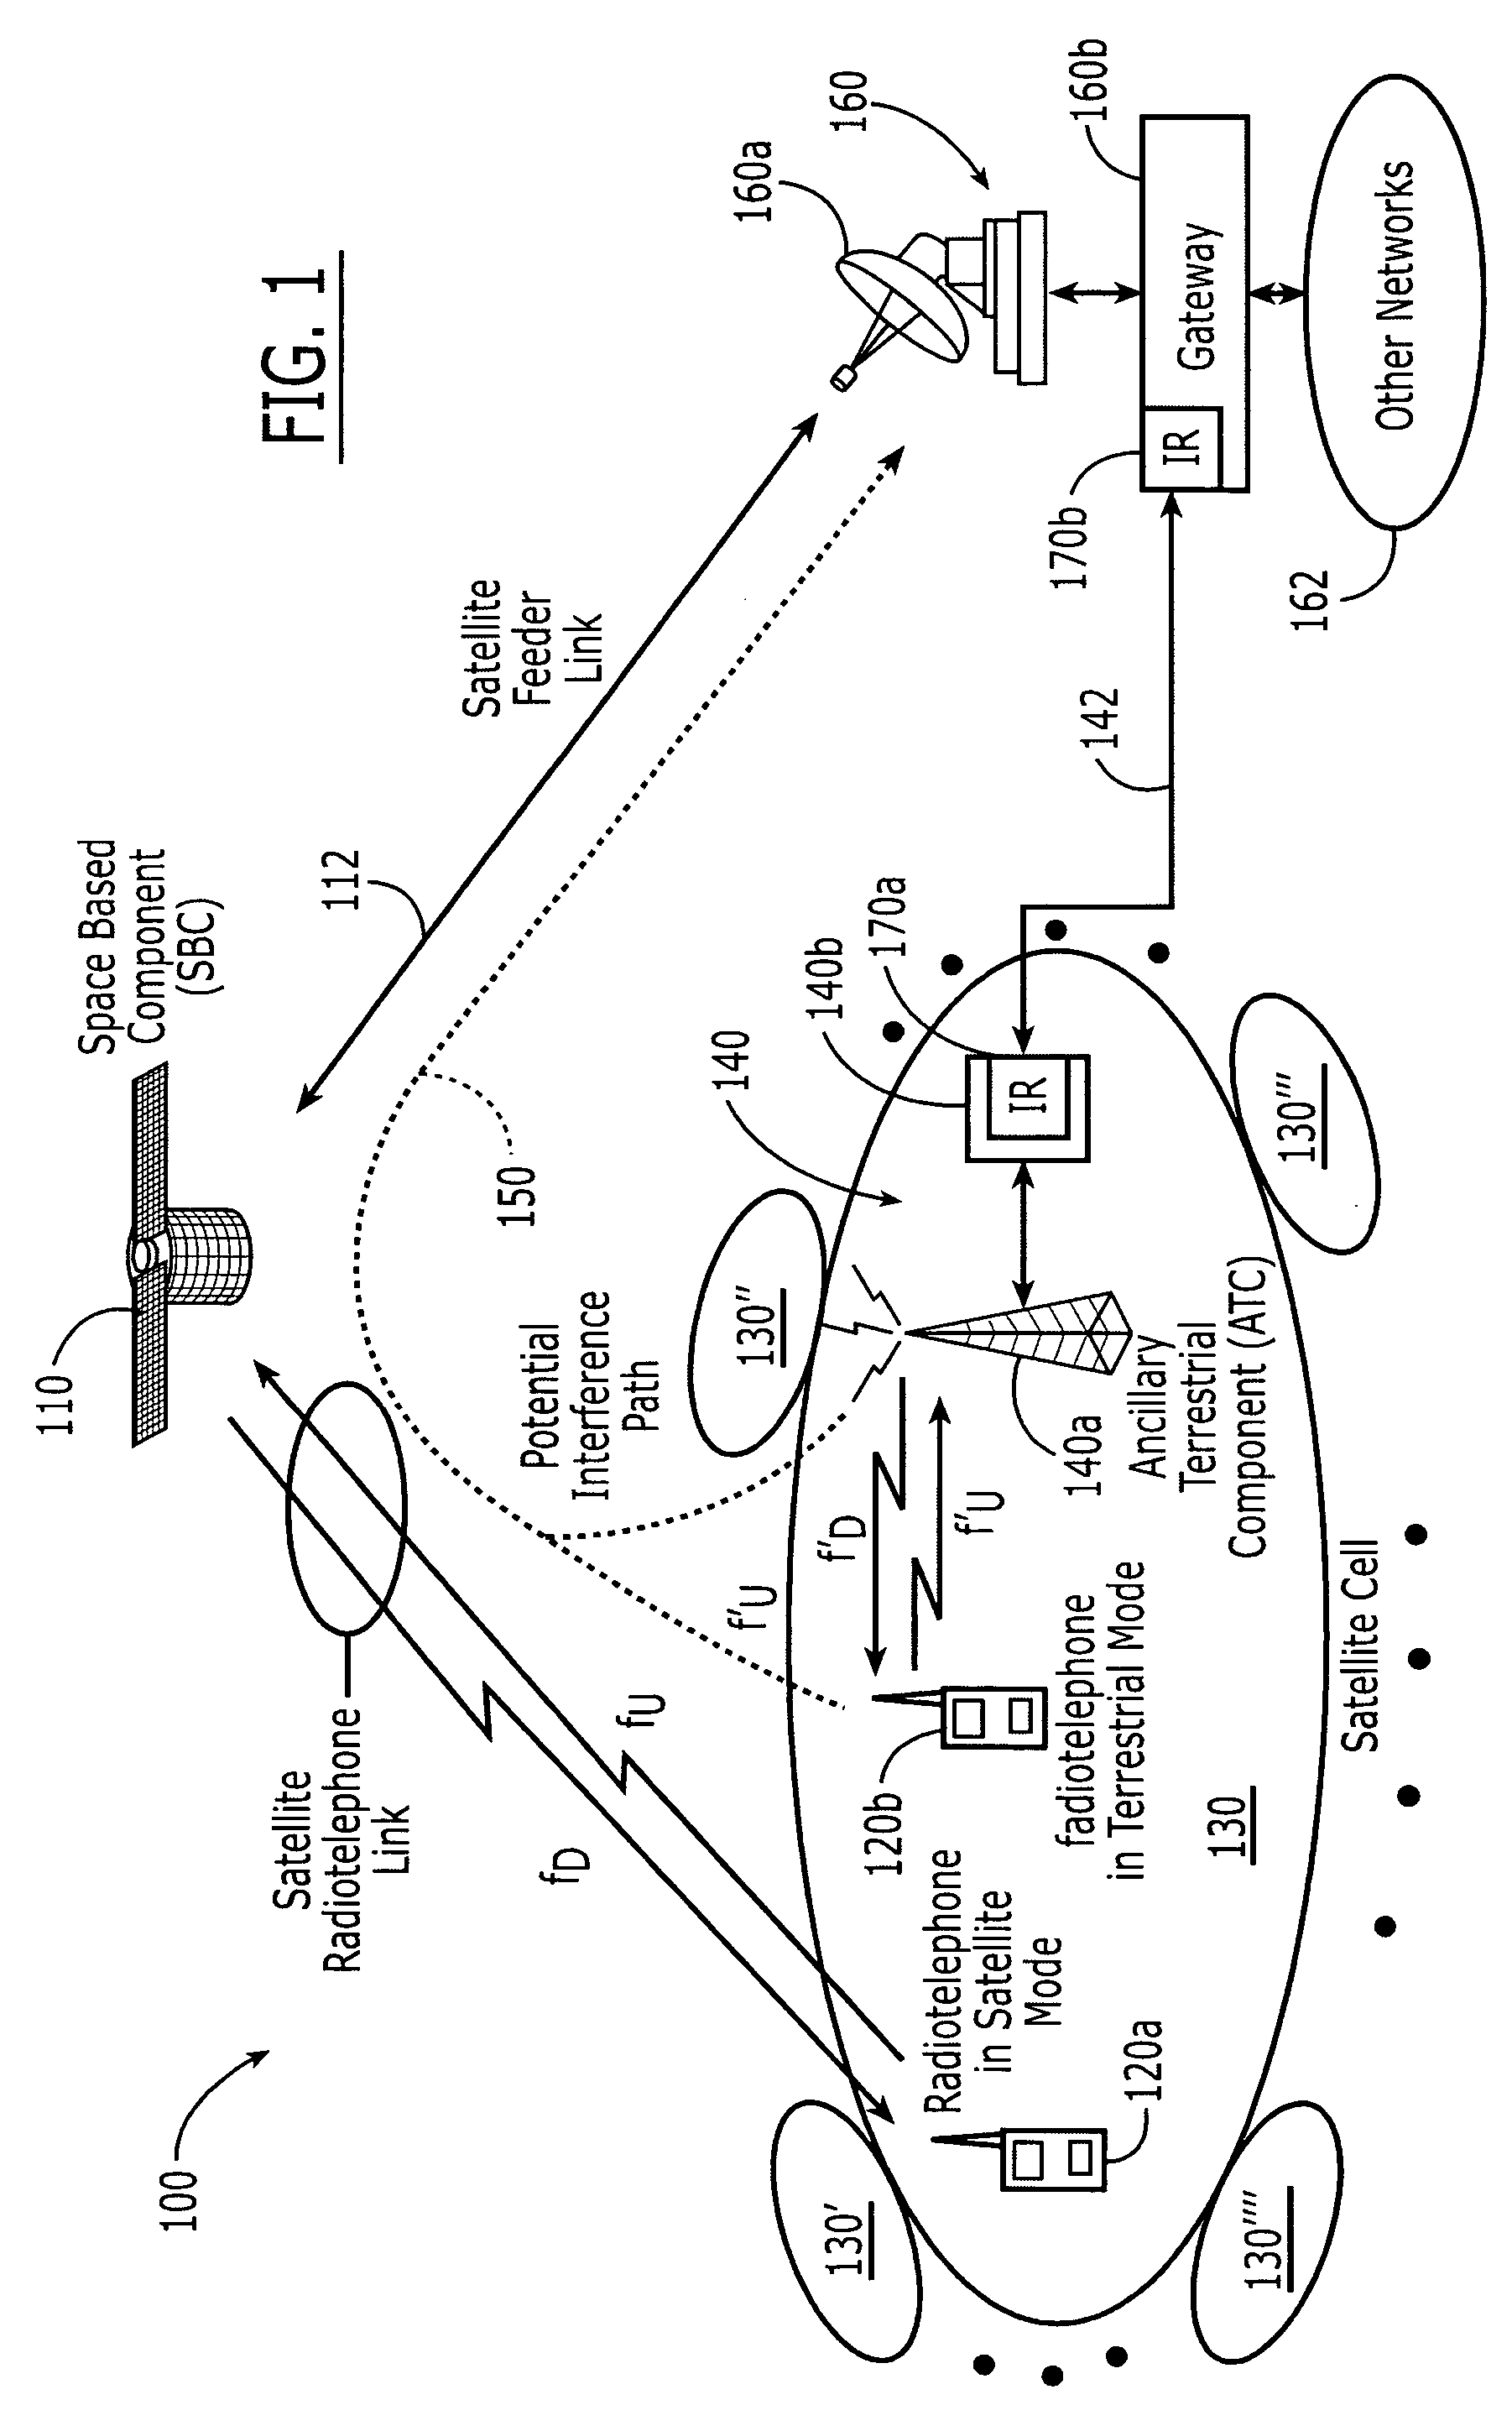 Radiotelephones and operating methods that use a single radio frequency chain and a single baseband processor for space-based and terrestrial communications